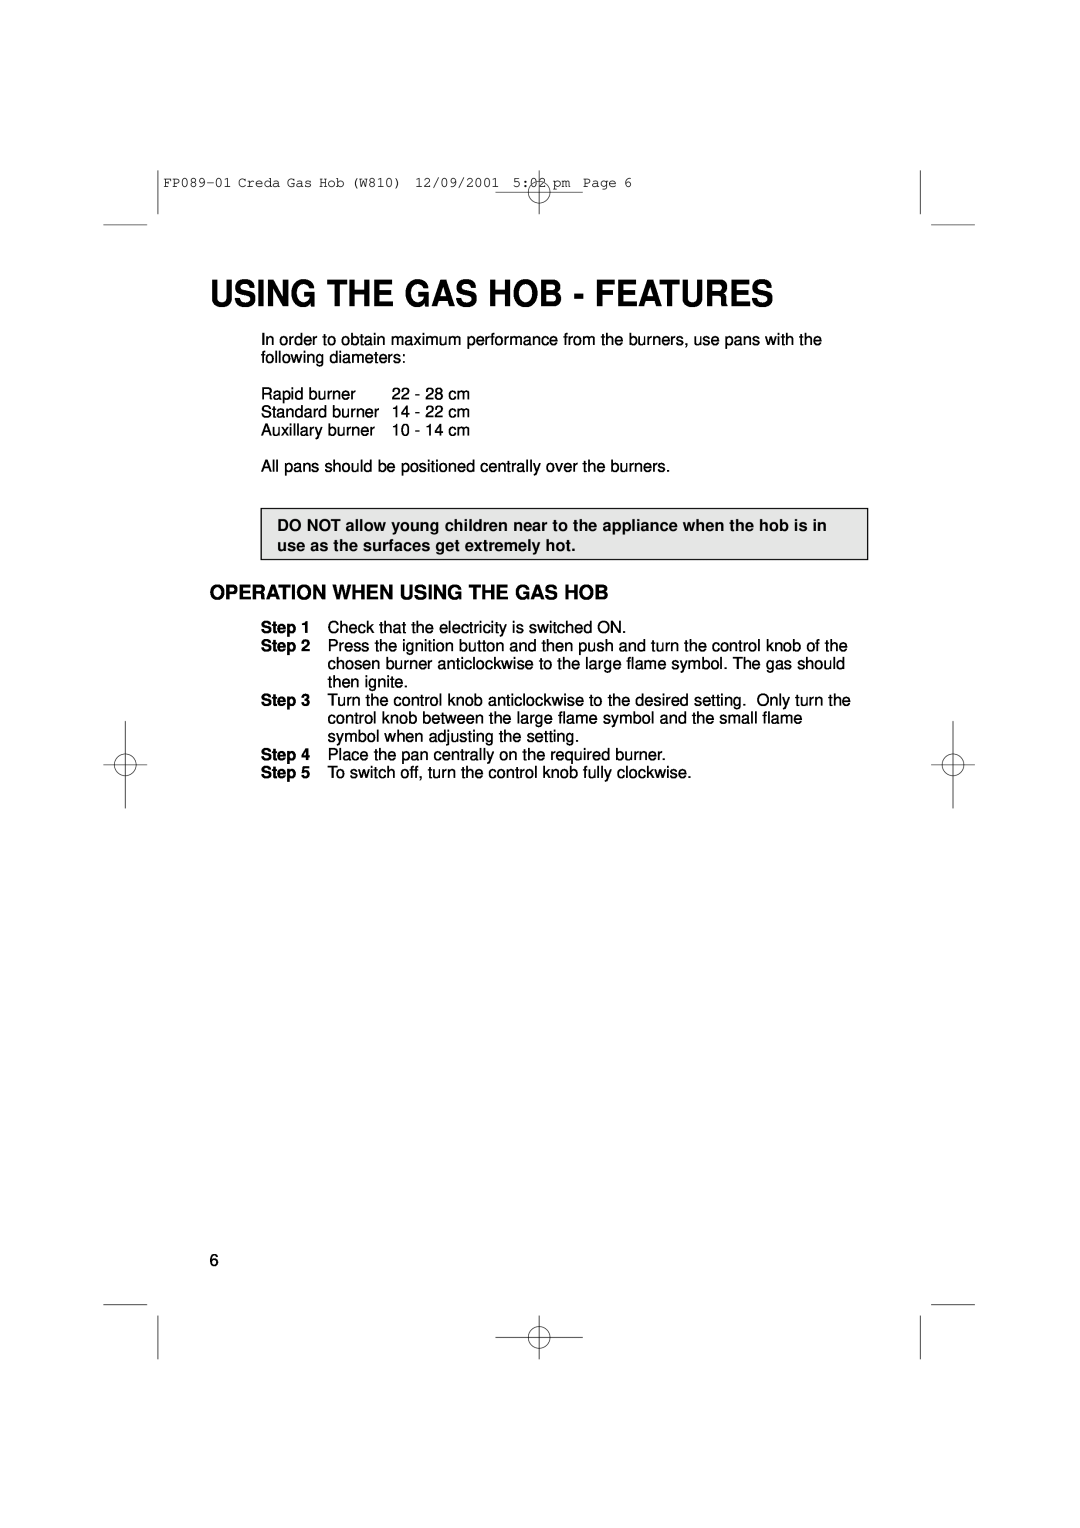 Creda W810 manual Using The Gas Hob - Features, Operation When Using The Gas Hob 